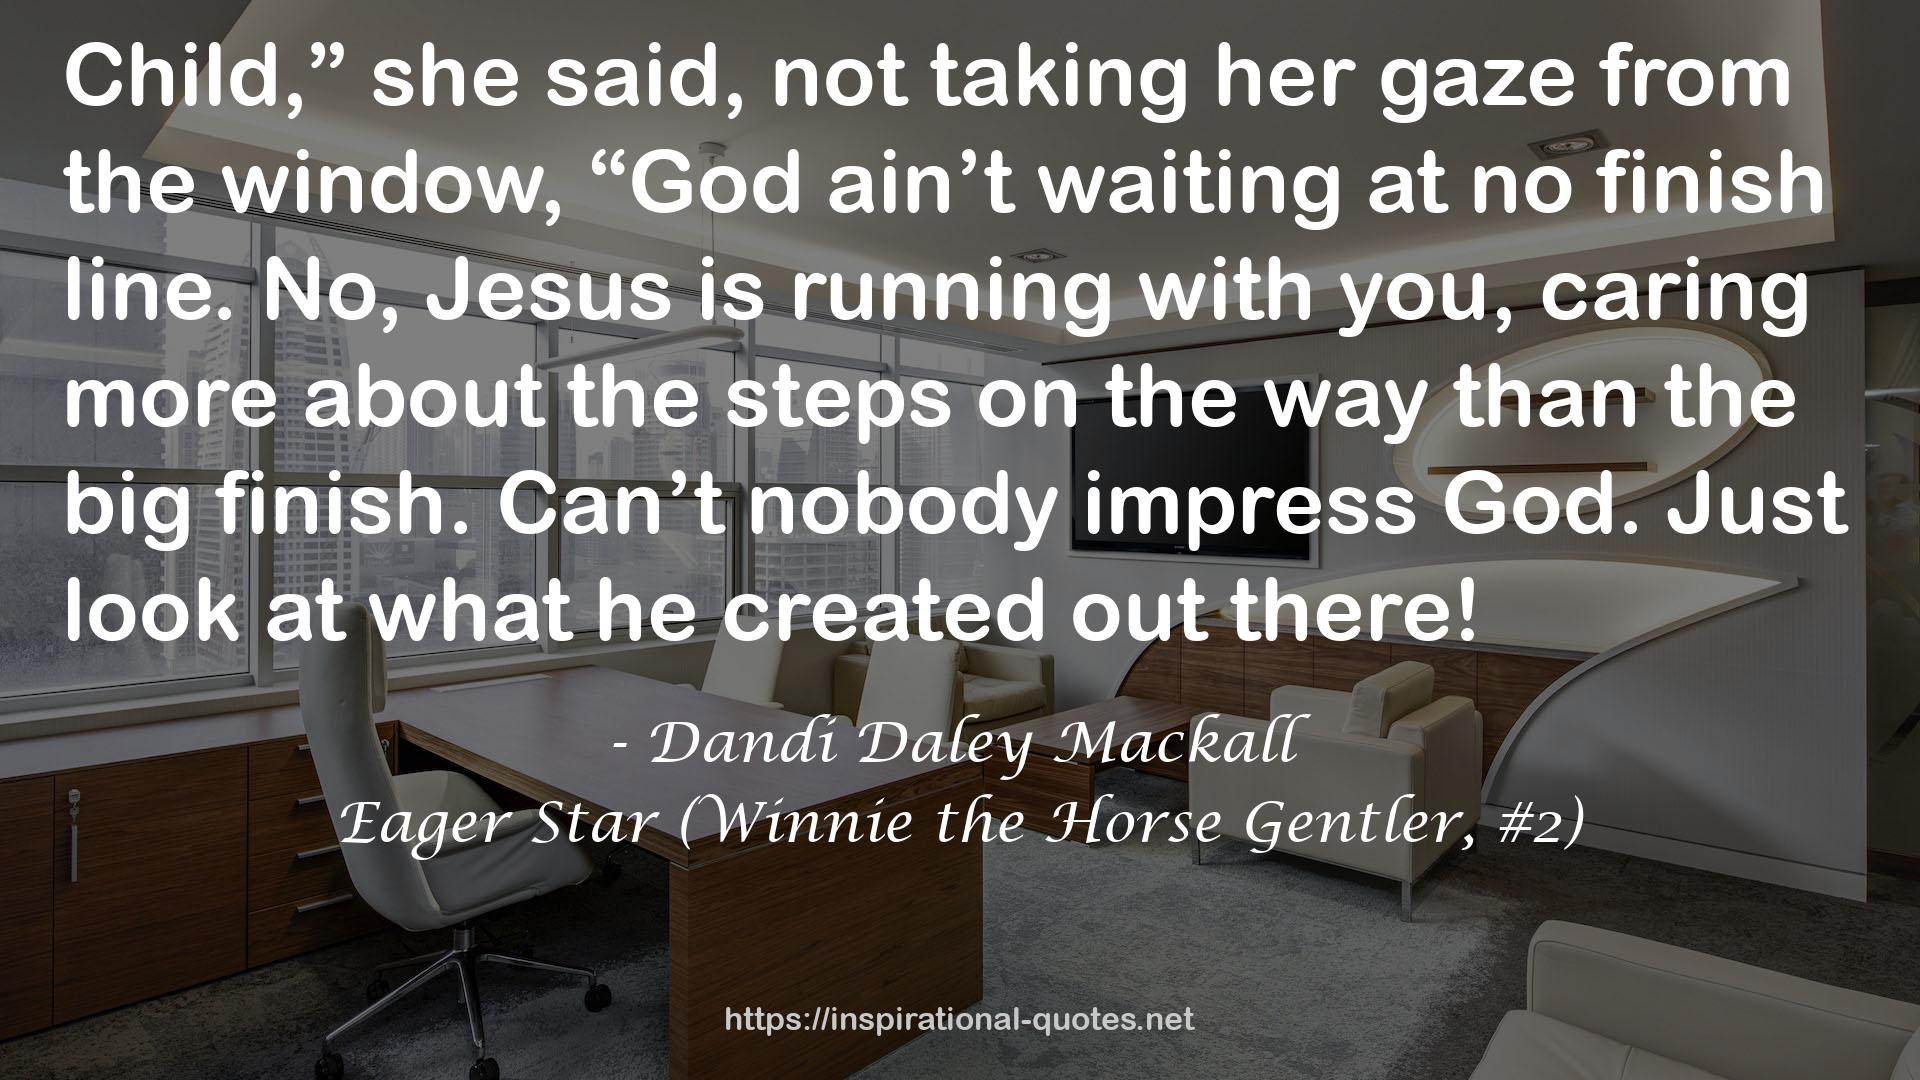 Eager Star (Winnie the Horse Gentler, #2) QUOTES